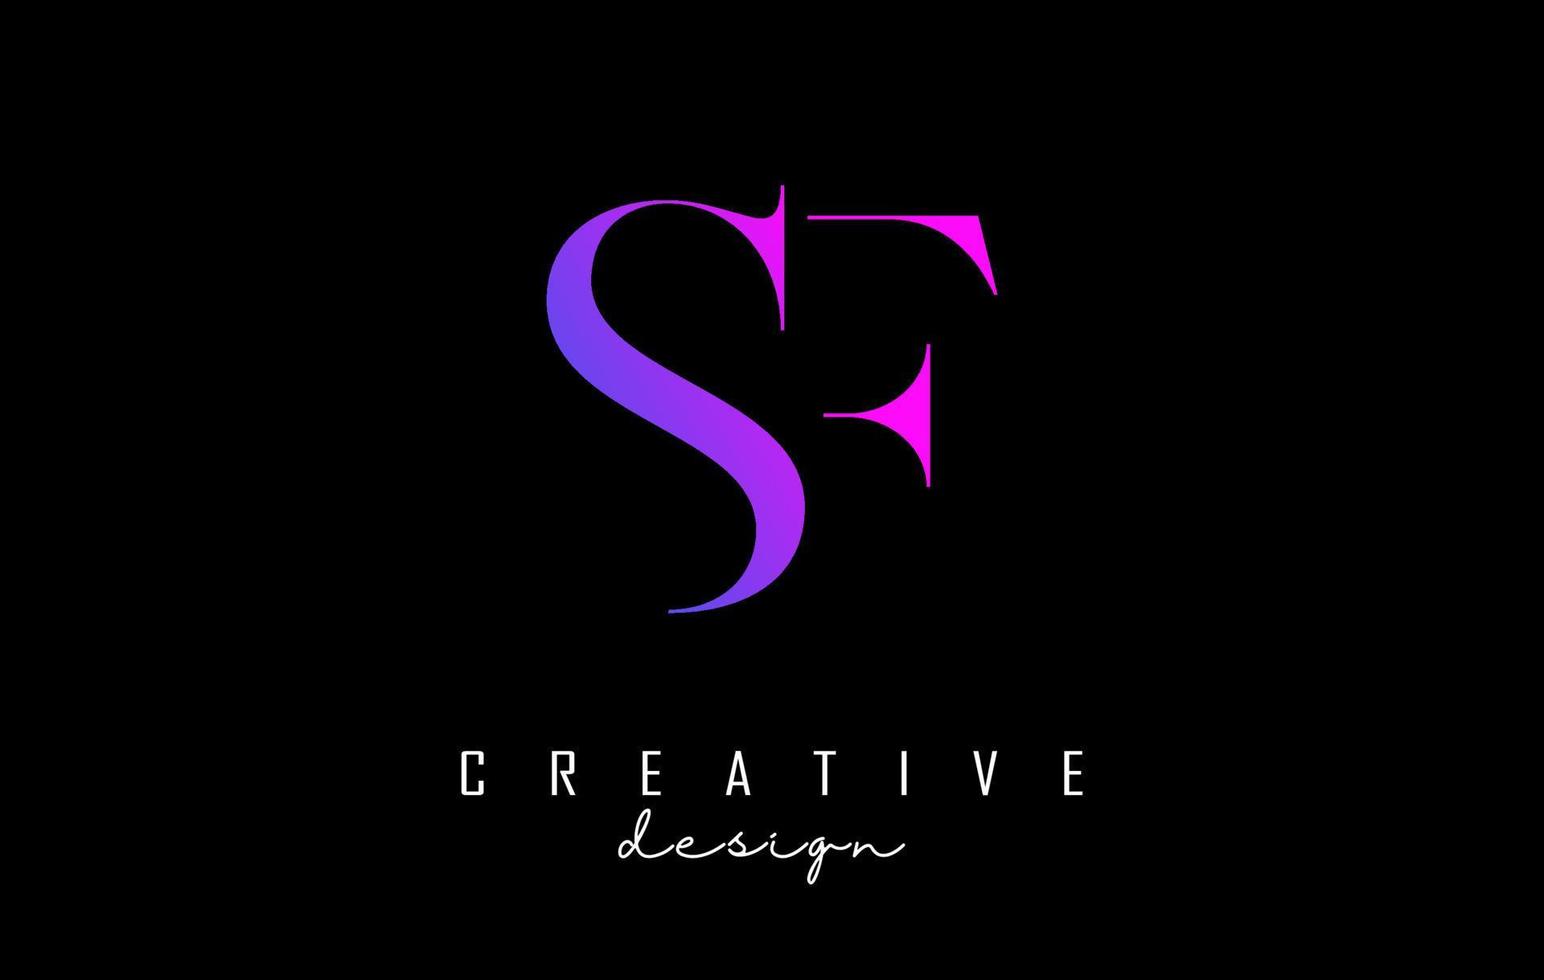 Colorful pink and blue SF s f letters design logo logotype concept with serif font and elegant style vector illustration.